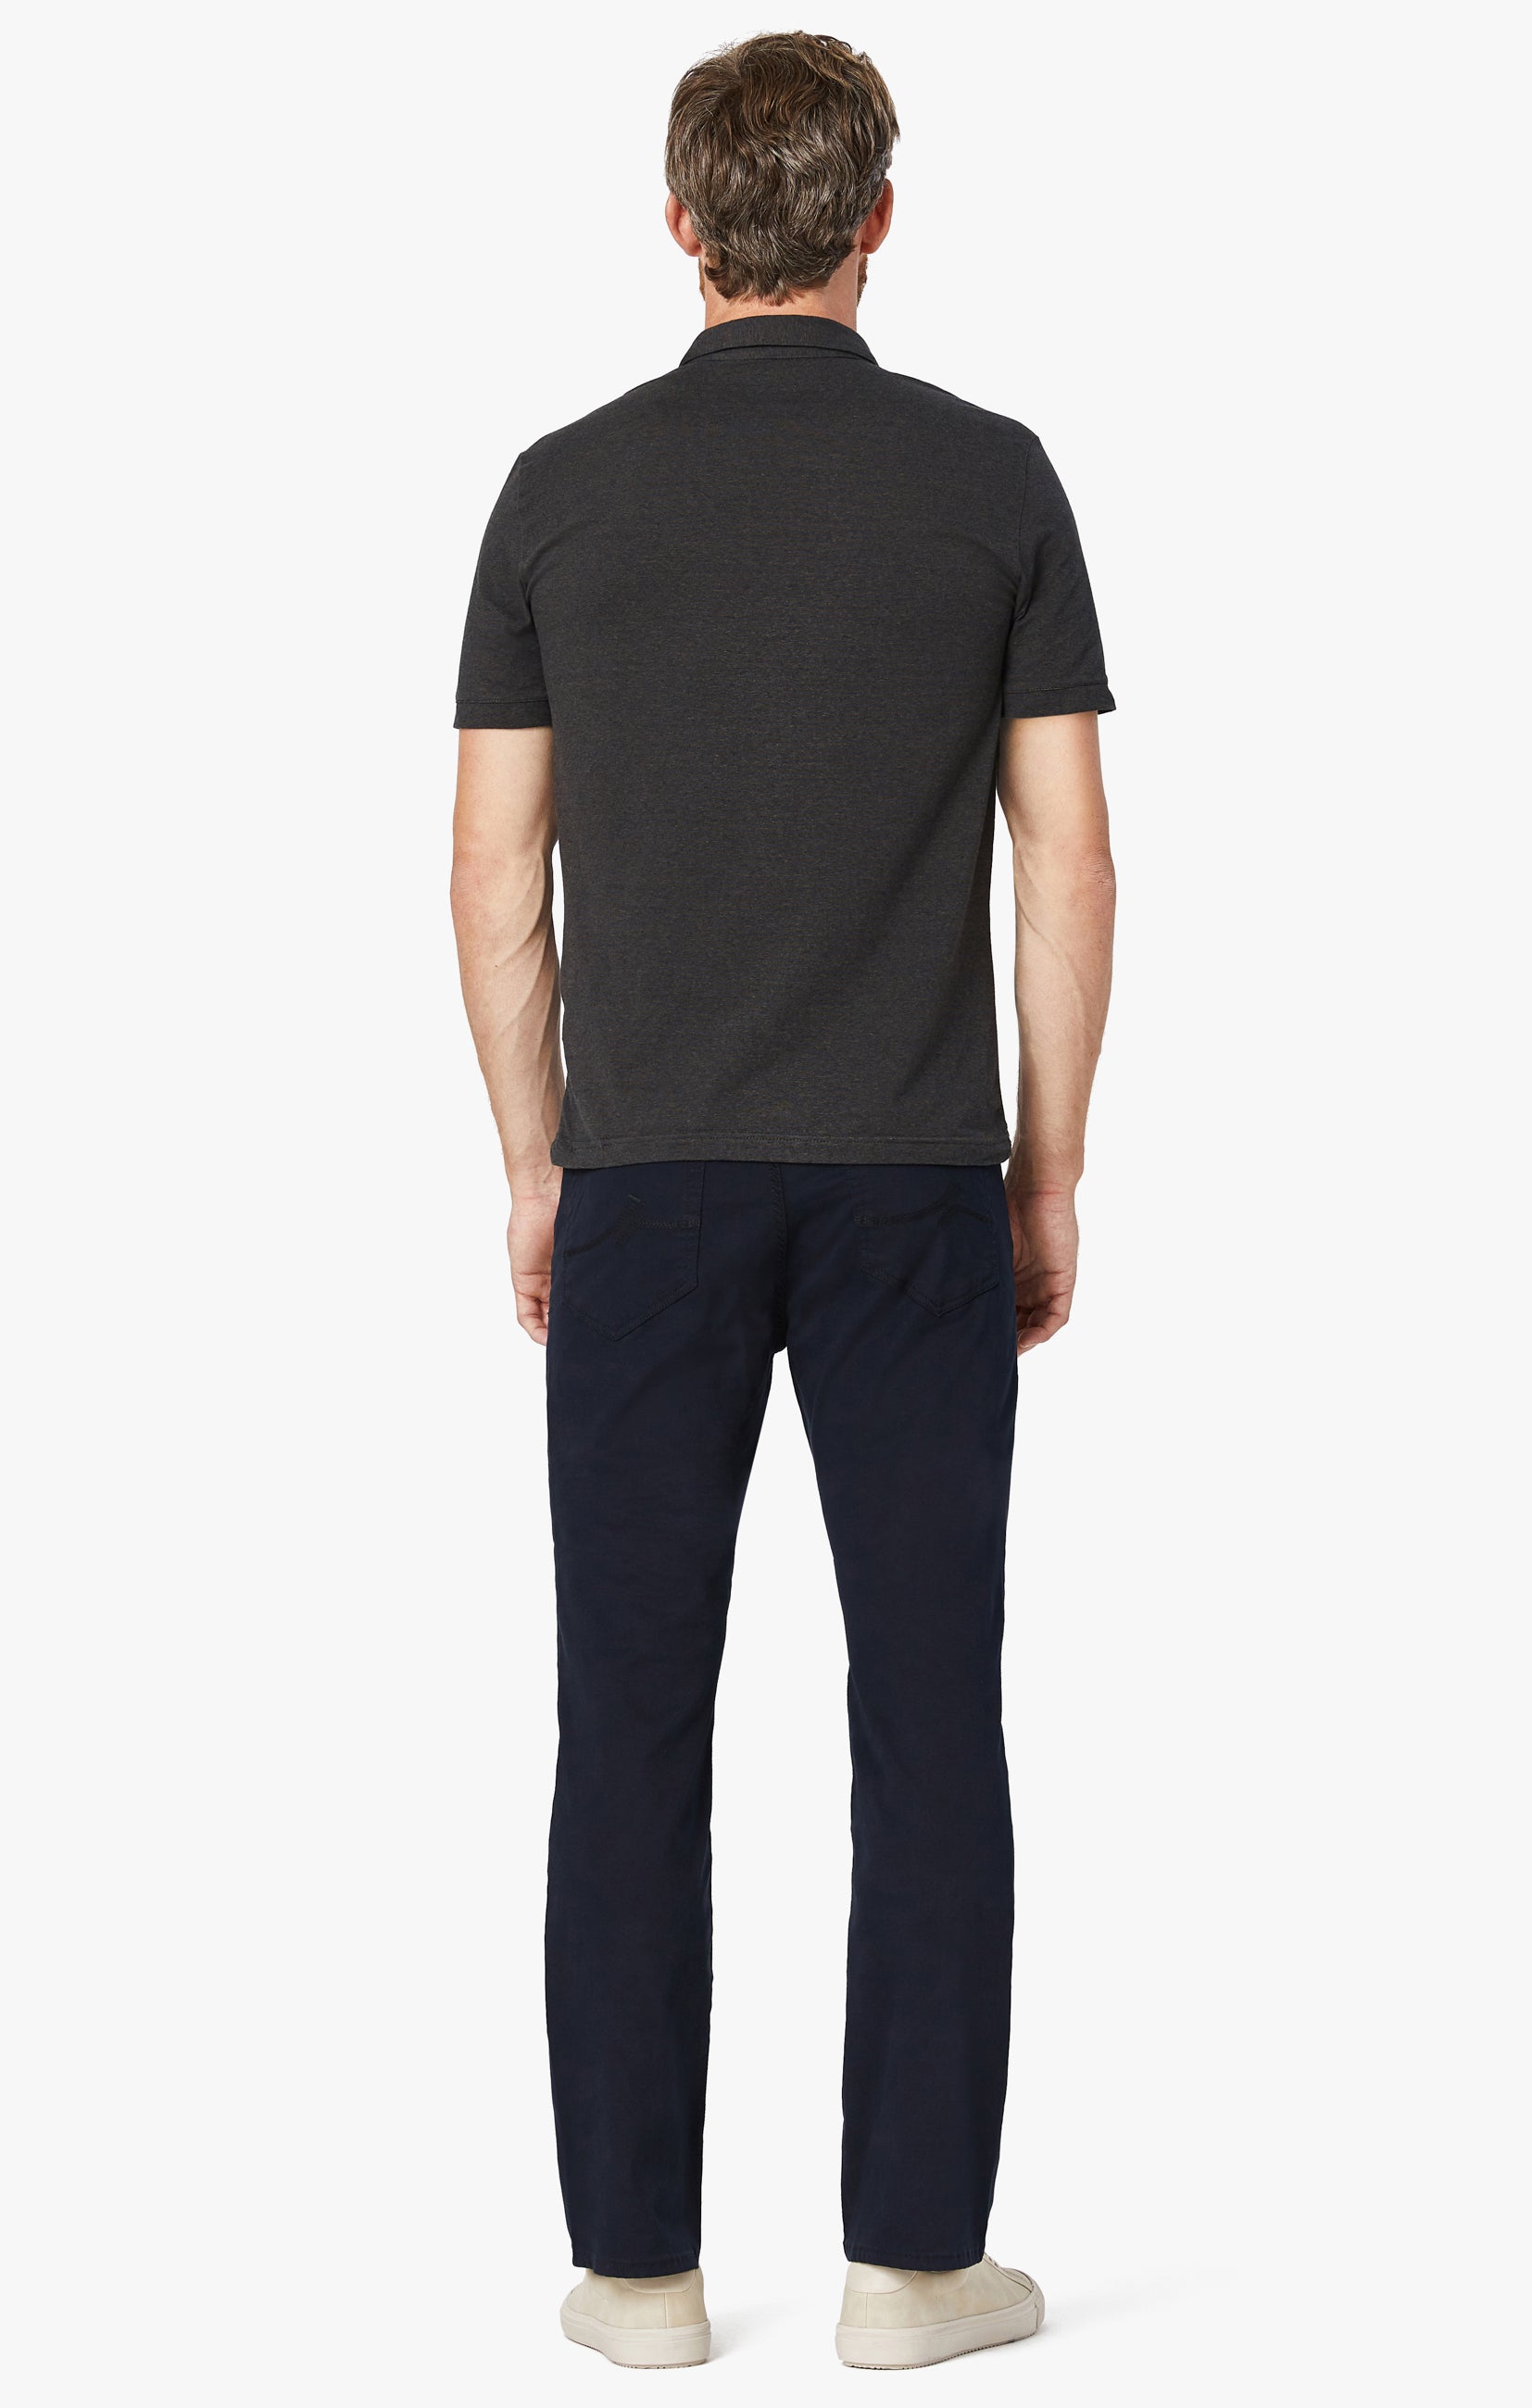 Charisma Classic Fit Pants in Navy Twill Image 6